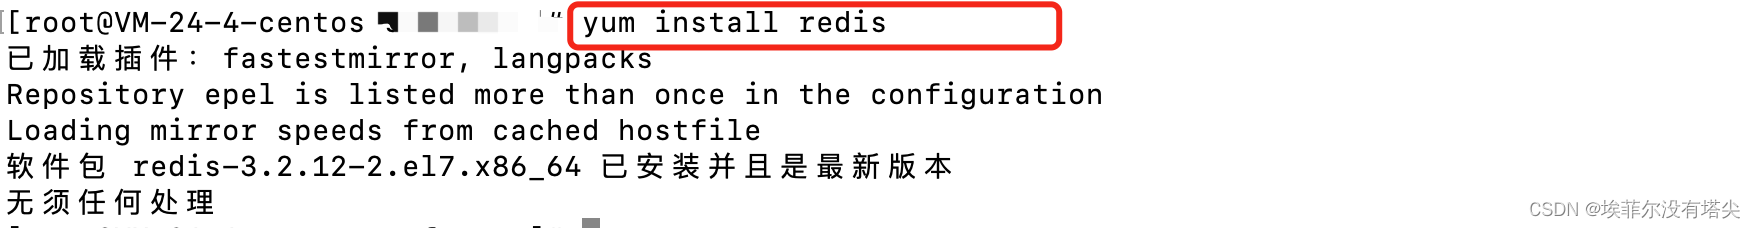 <span style='color:red;'>centos</span><span style='color:red;'>7</span> linux<span style='color:red;'>下</span>yum<span style='color:red;'>安装</span><span style='color:red;'>redis</span>